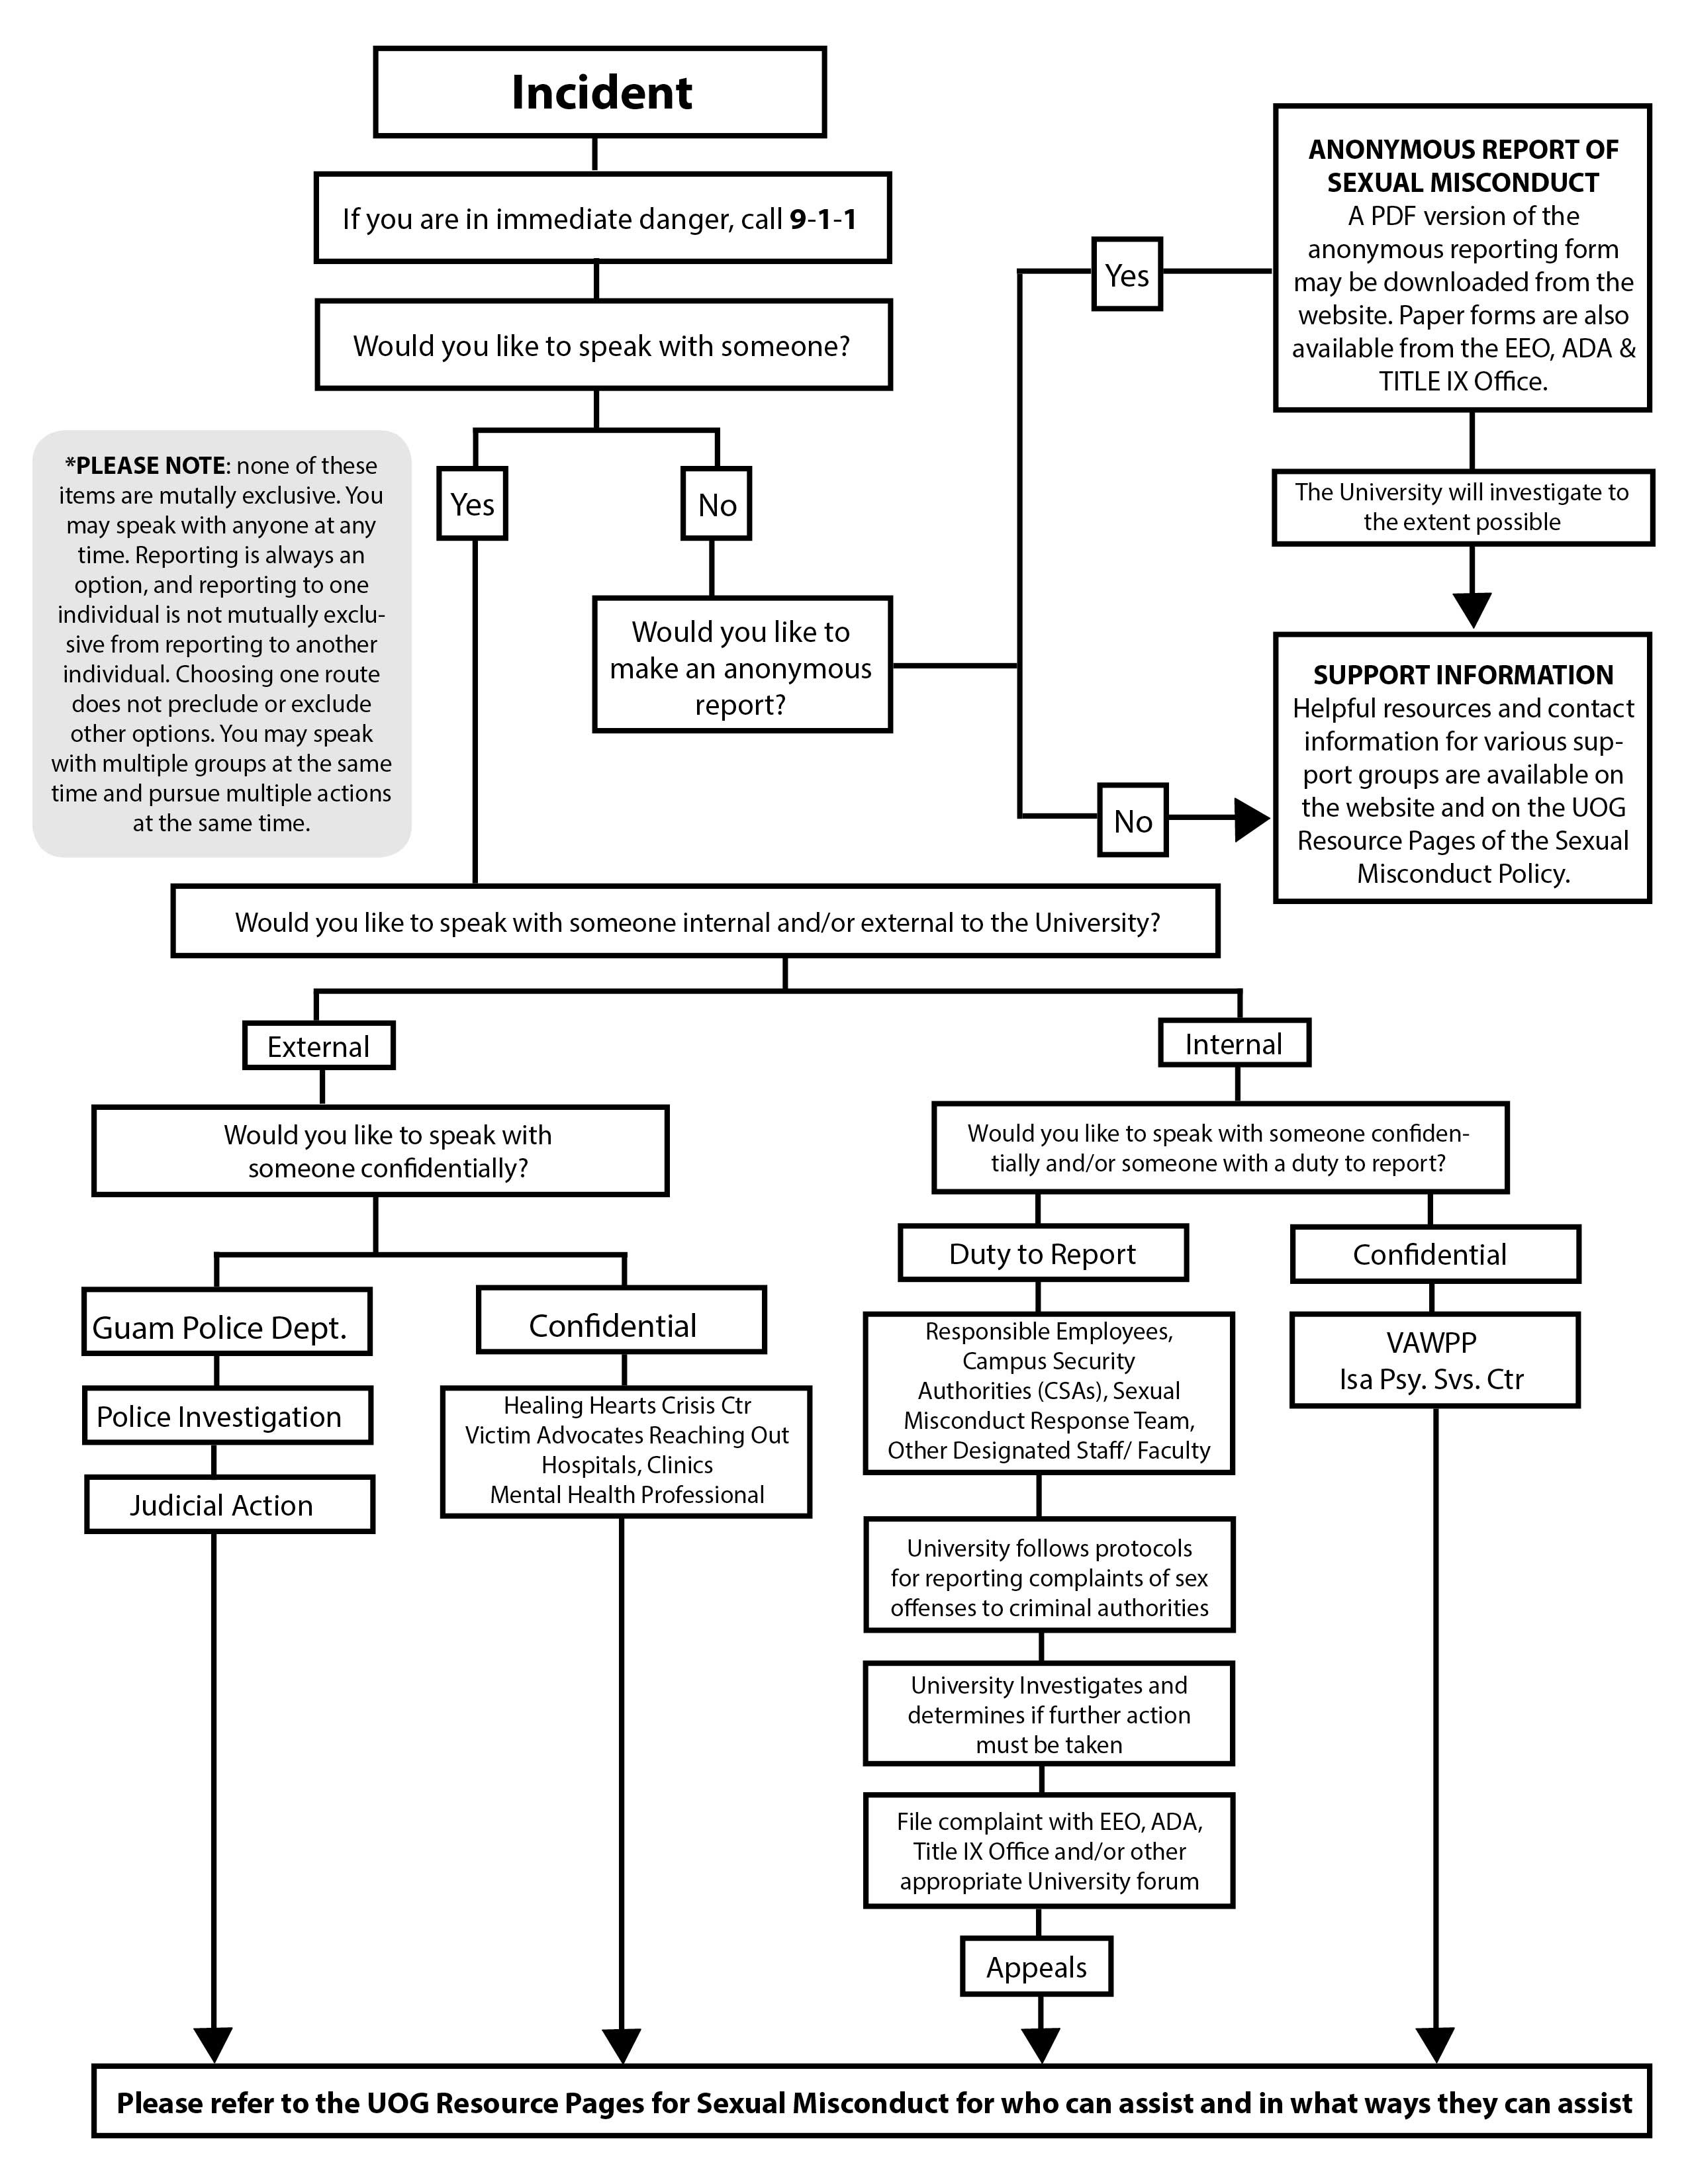 Process Flowchart - see full text outline after image